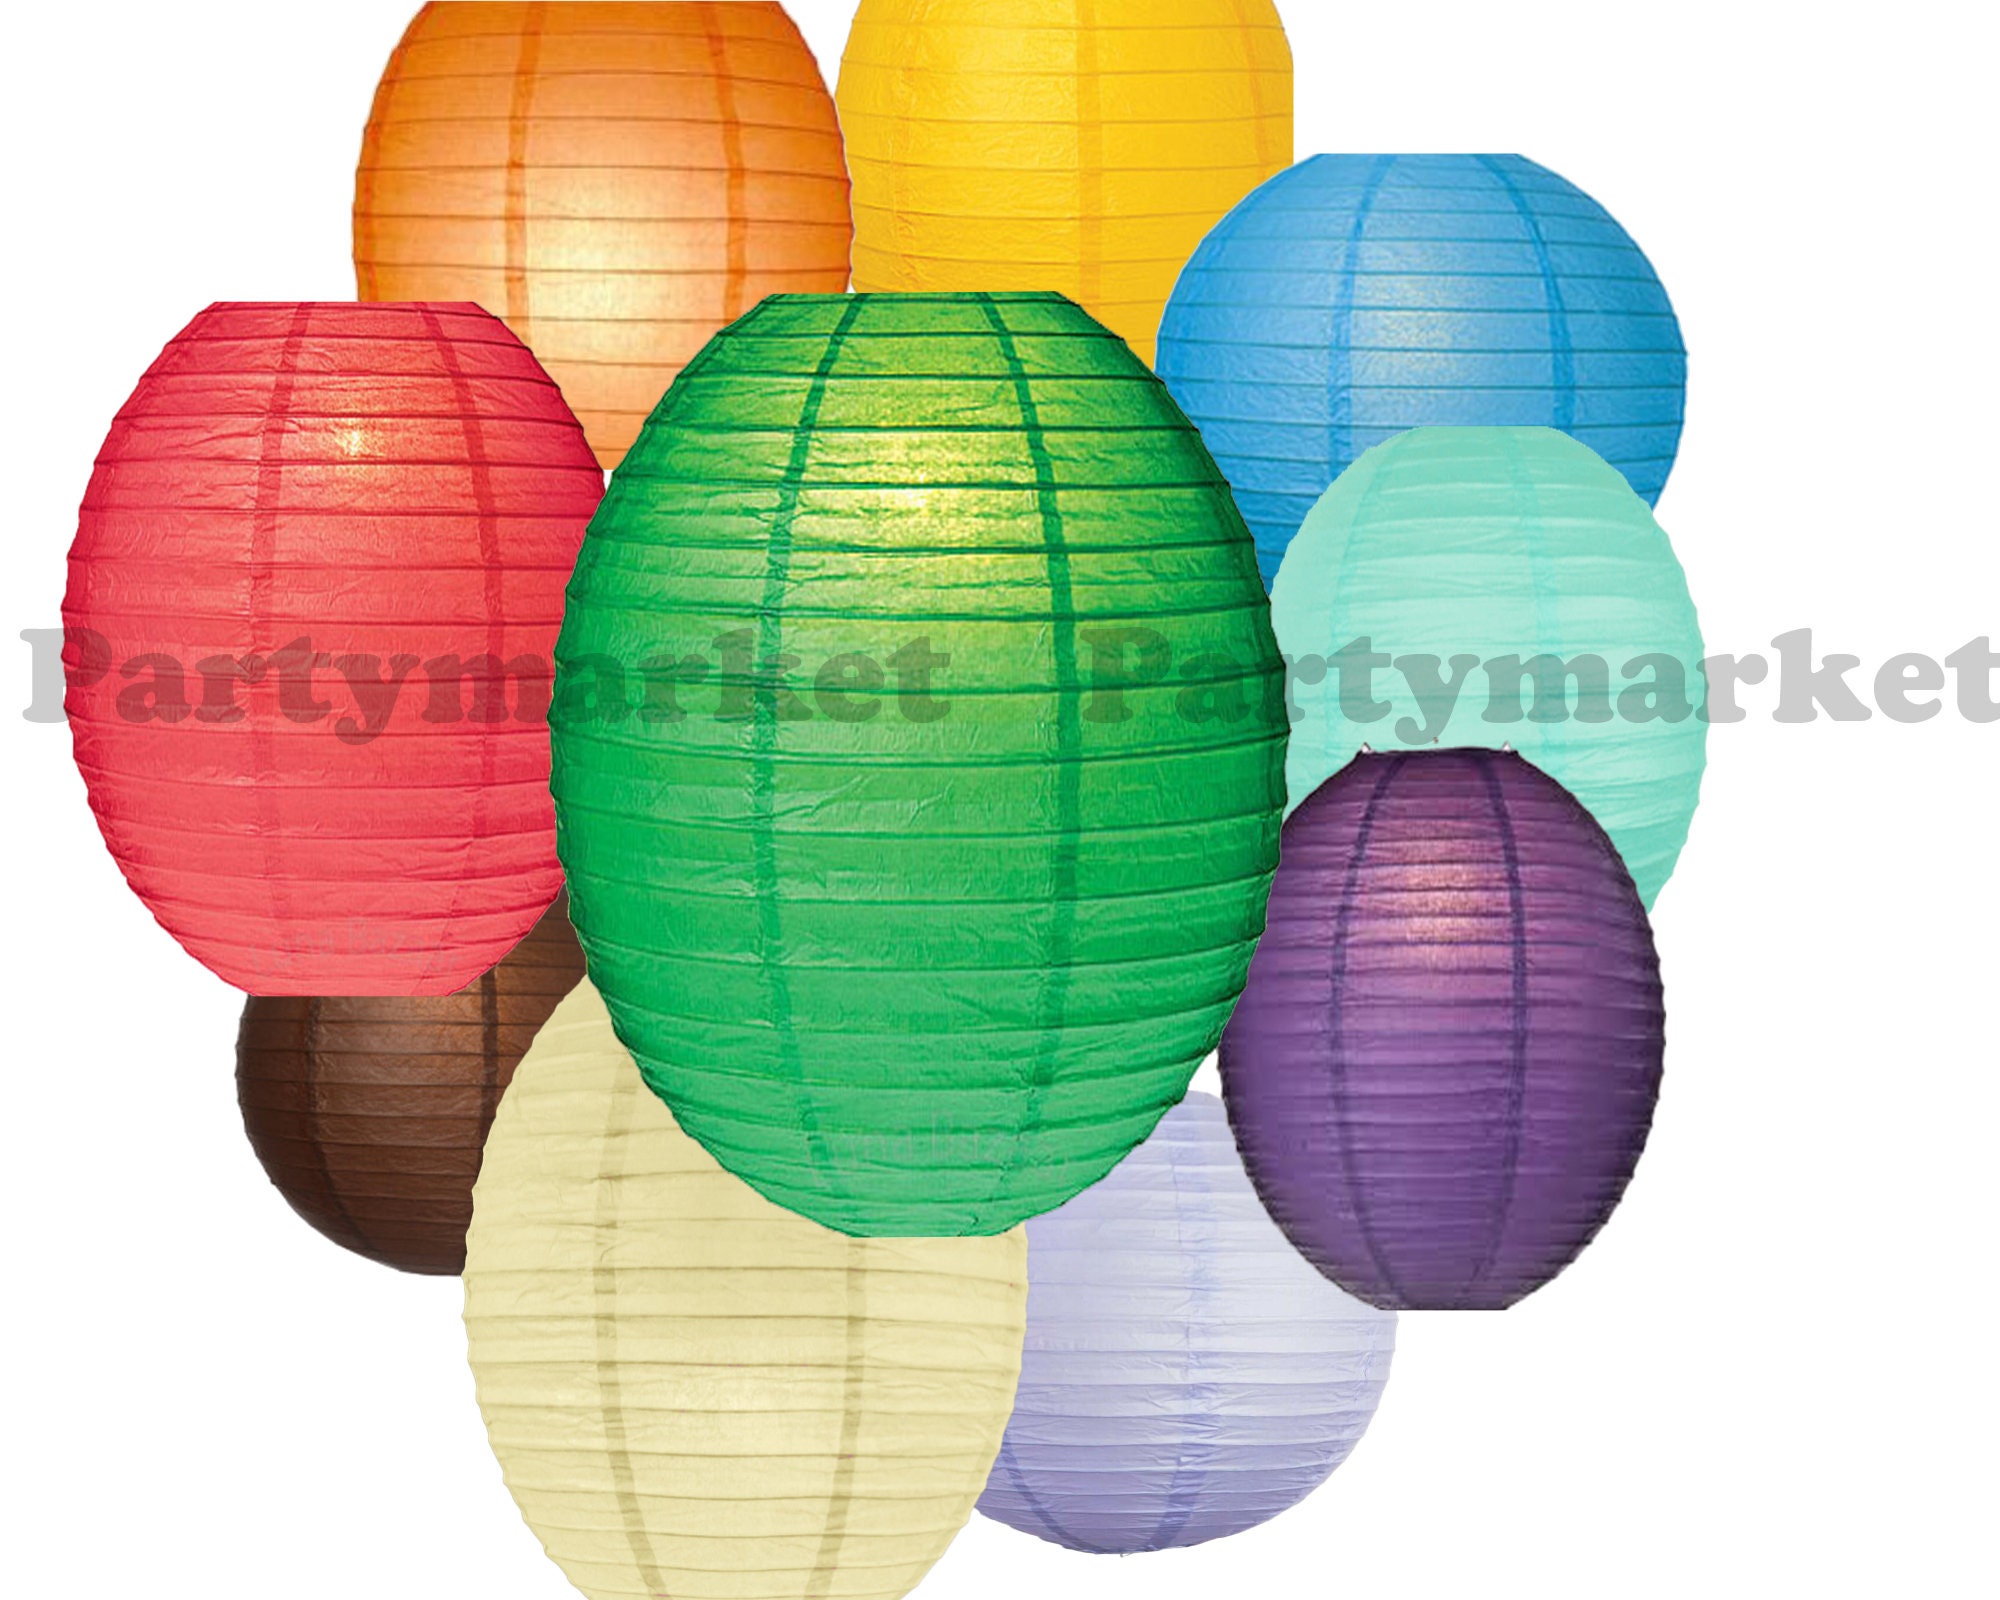 Watercolor Paper Lanterns Clipart Chinese Lanterns Download Instant  Download Glowing Paper Lantern Borders Scrapbooking Supplies 